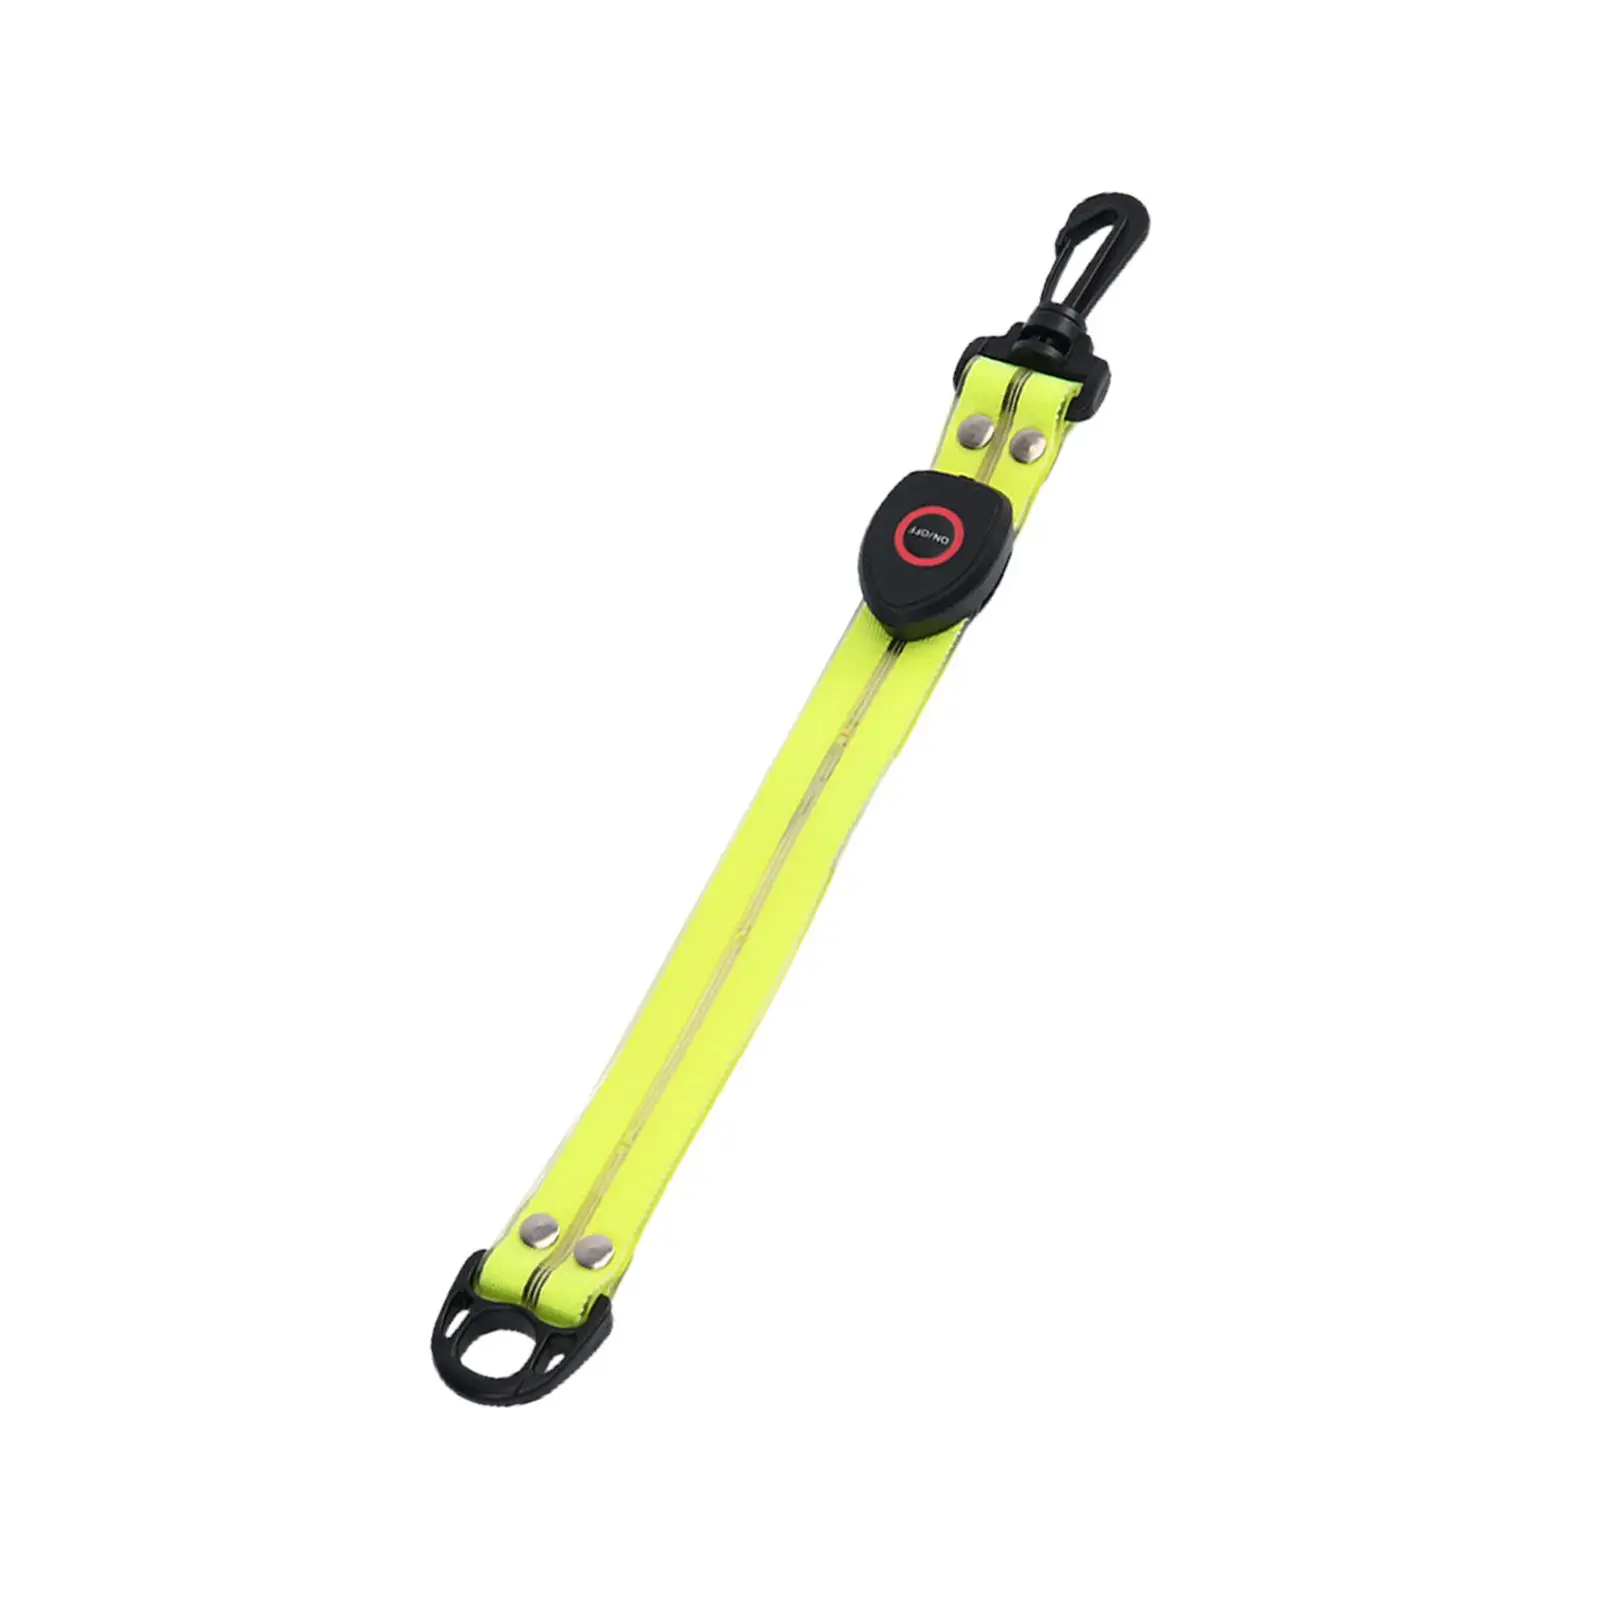 LED Flashing Belt Running Gear Pendant Elastic Glowing Reflector Straps Backpack Tag for Hiking Walking Outdoor Adults Men Women